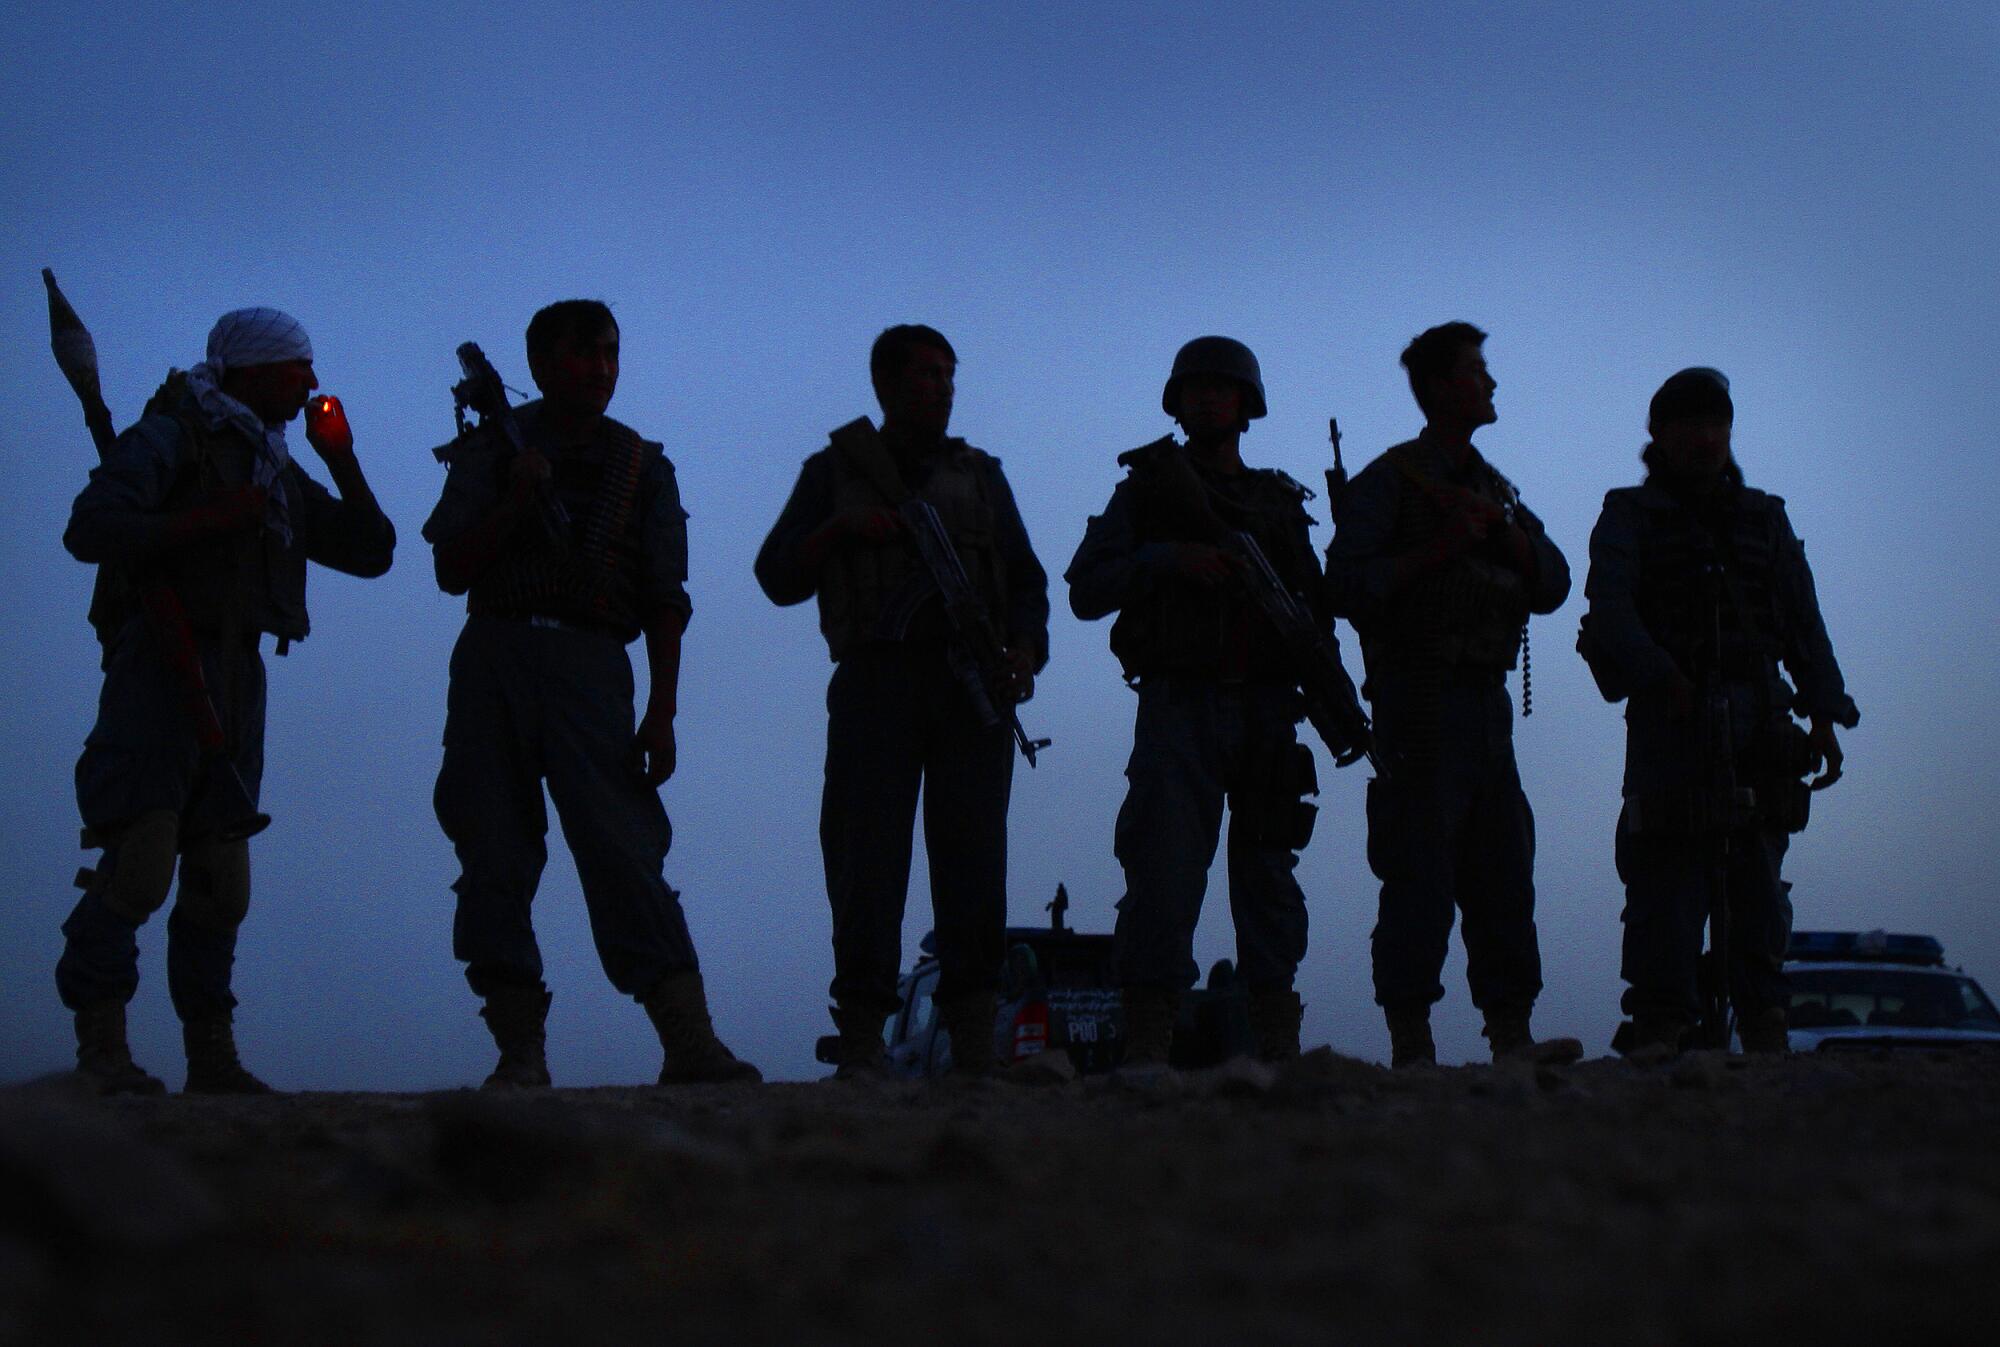 A line of armed officers silhouetted in the dawn